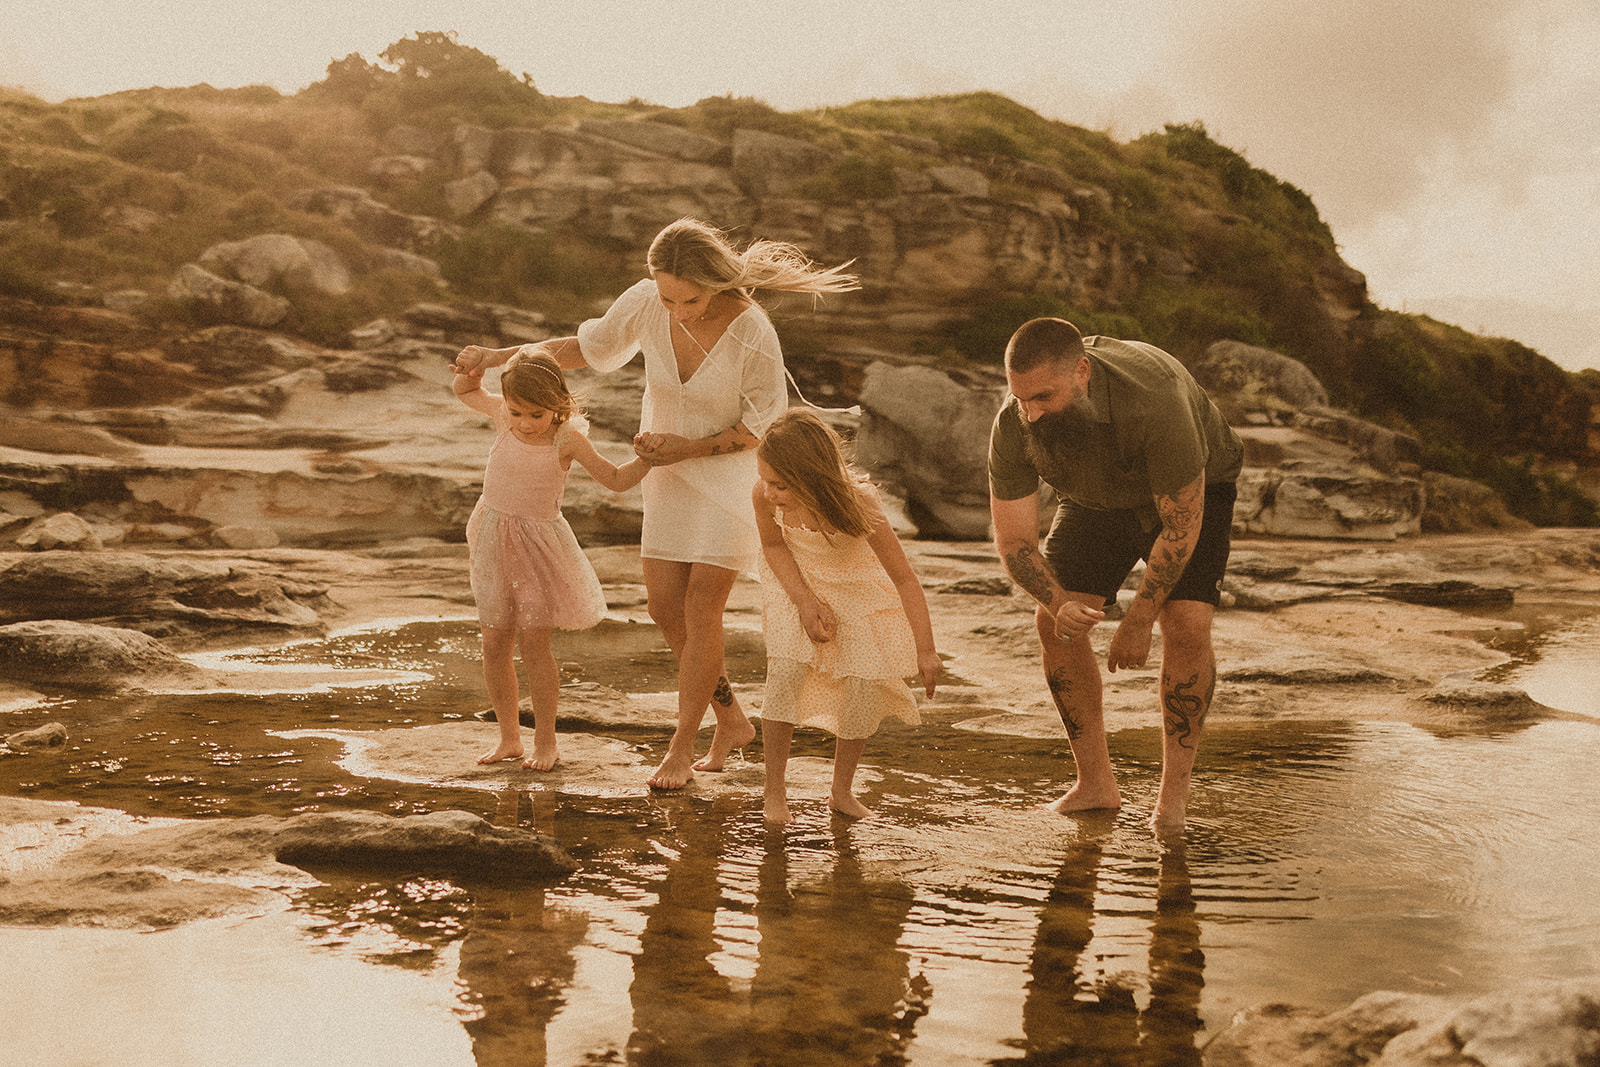 Family looking at the puddles while rock climbing. Family photography Sydney Eastern suburbs